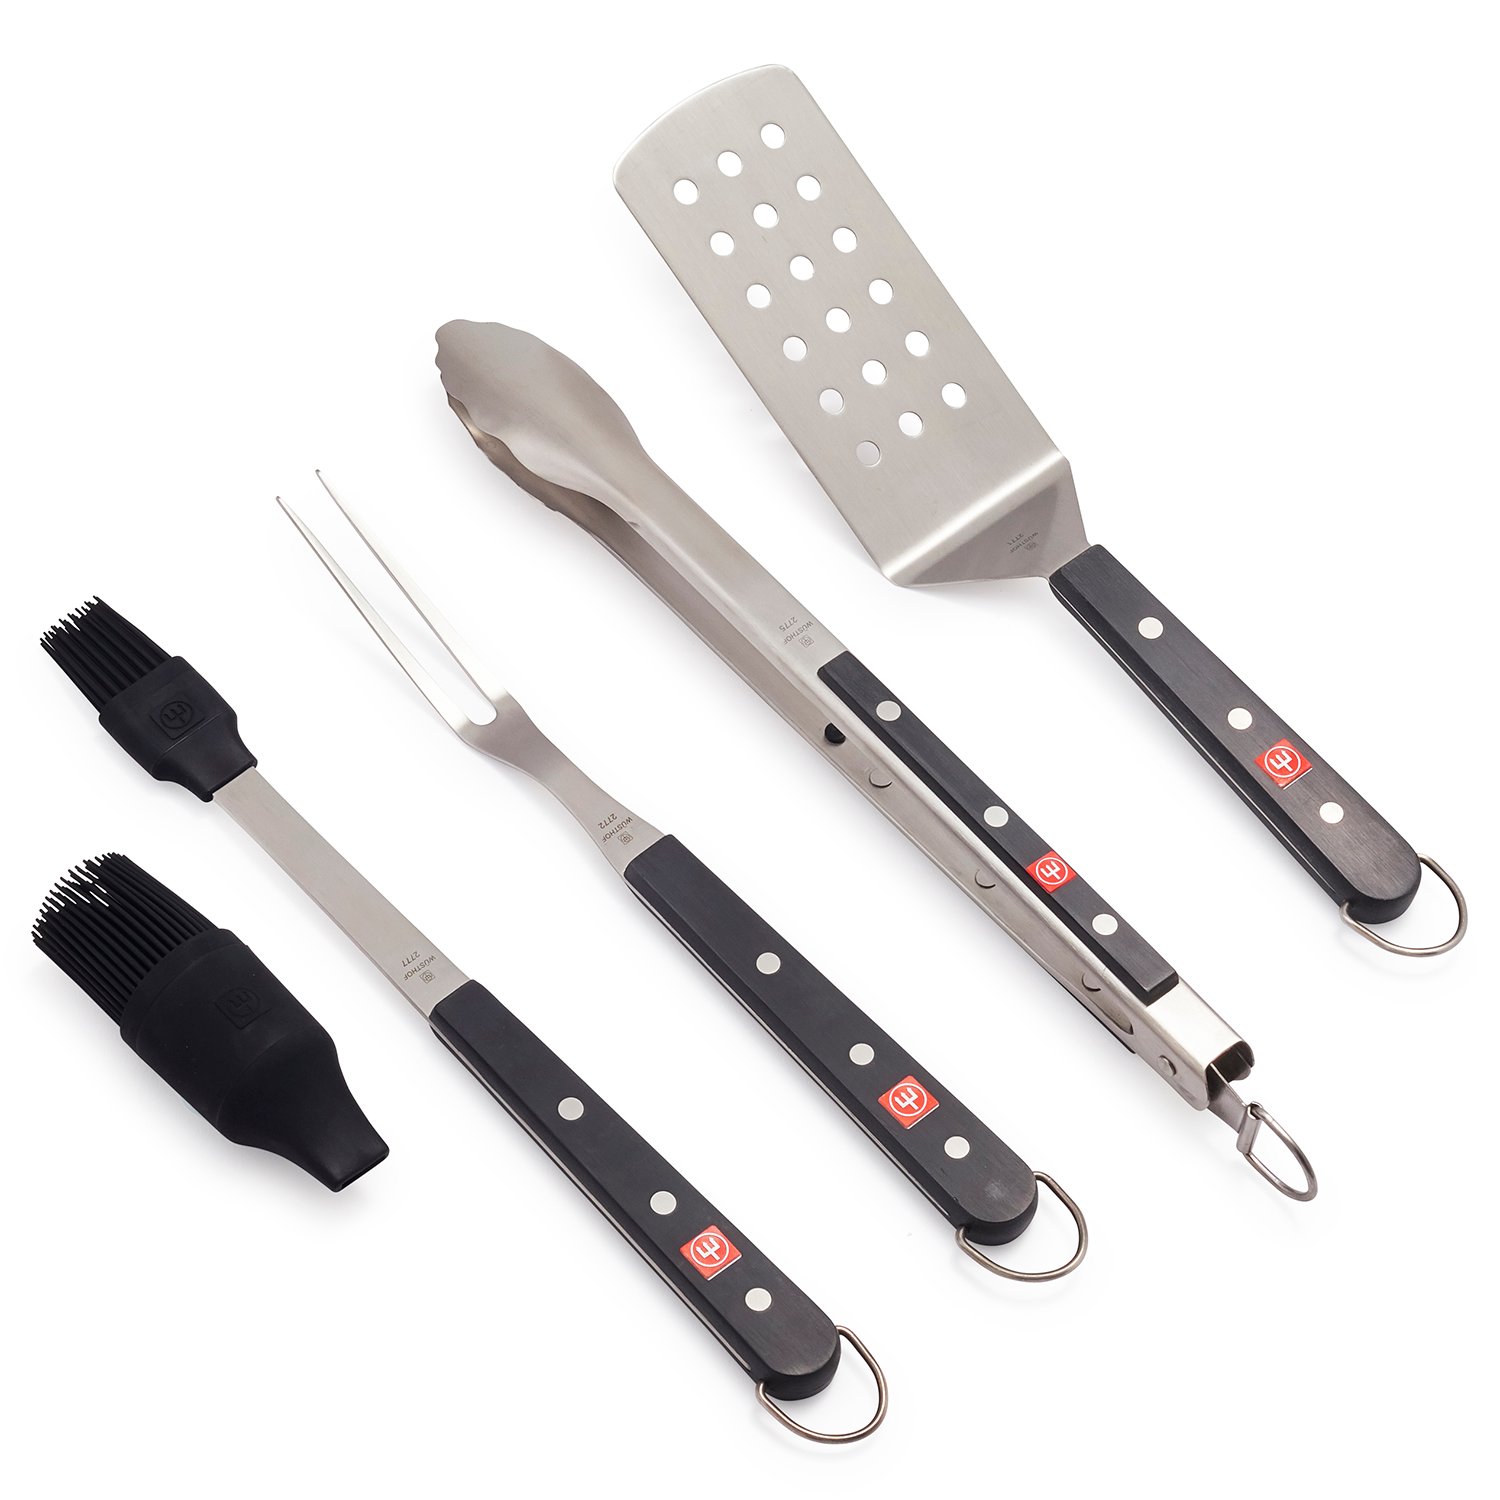 a turner, fork, brush and tongs bbq essentials set